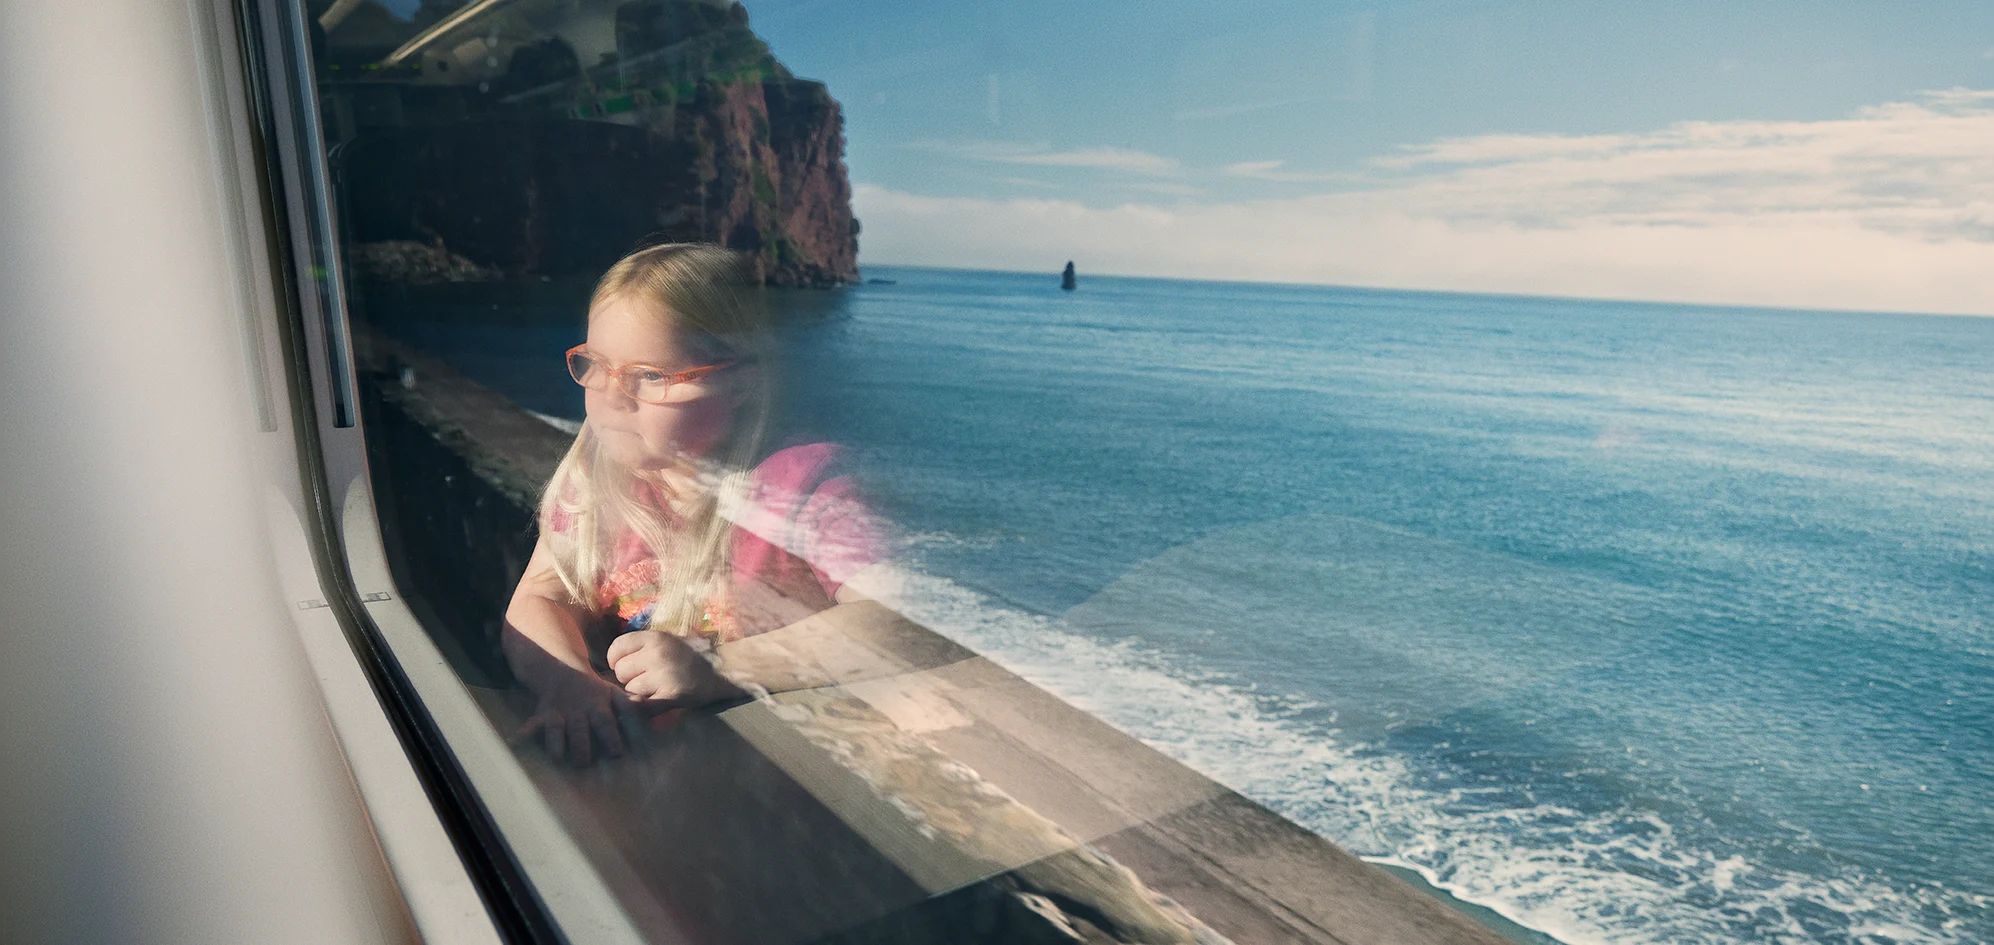 A young girl with blonde hair and red glasses reflected in a train window, sitting at a table in a train carriage and looking out over a beach and the sea.